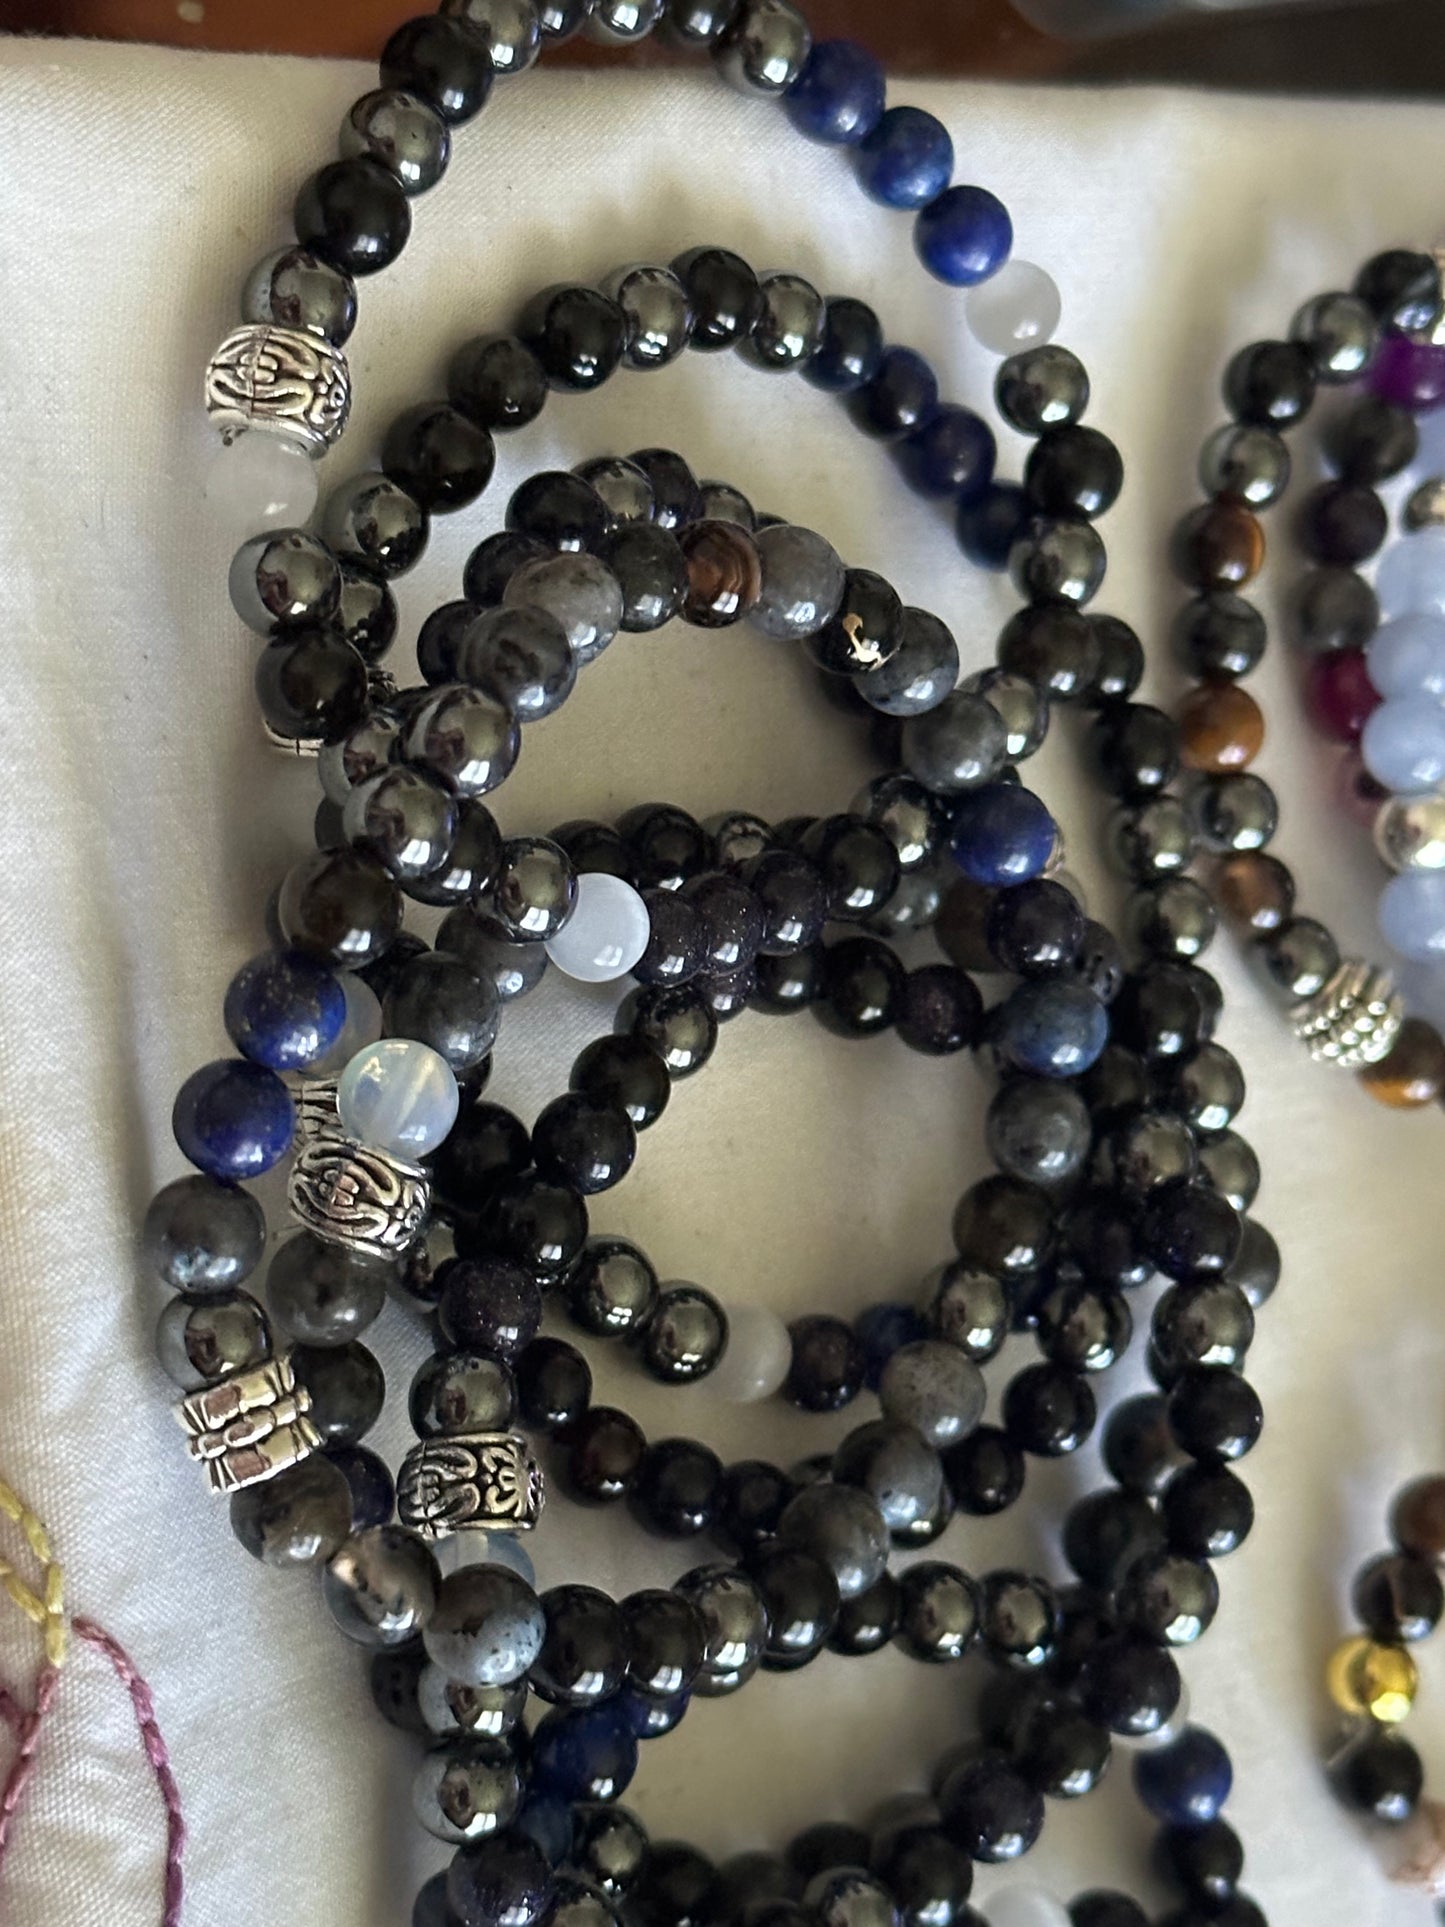 First Responders Protection & Healing Bracelets (No Charms)